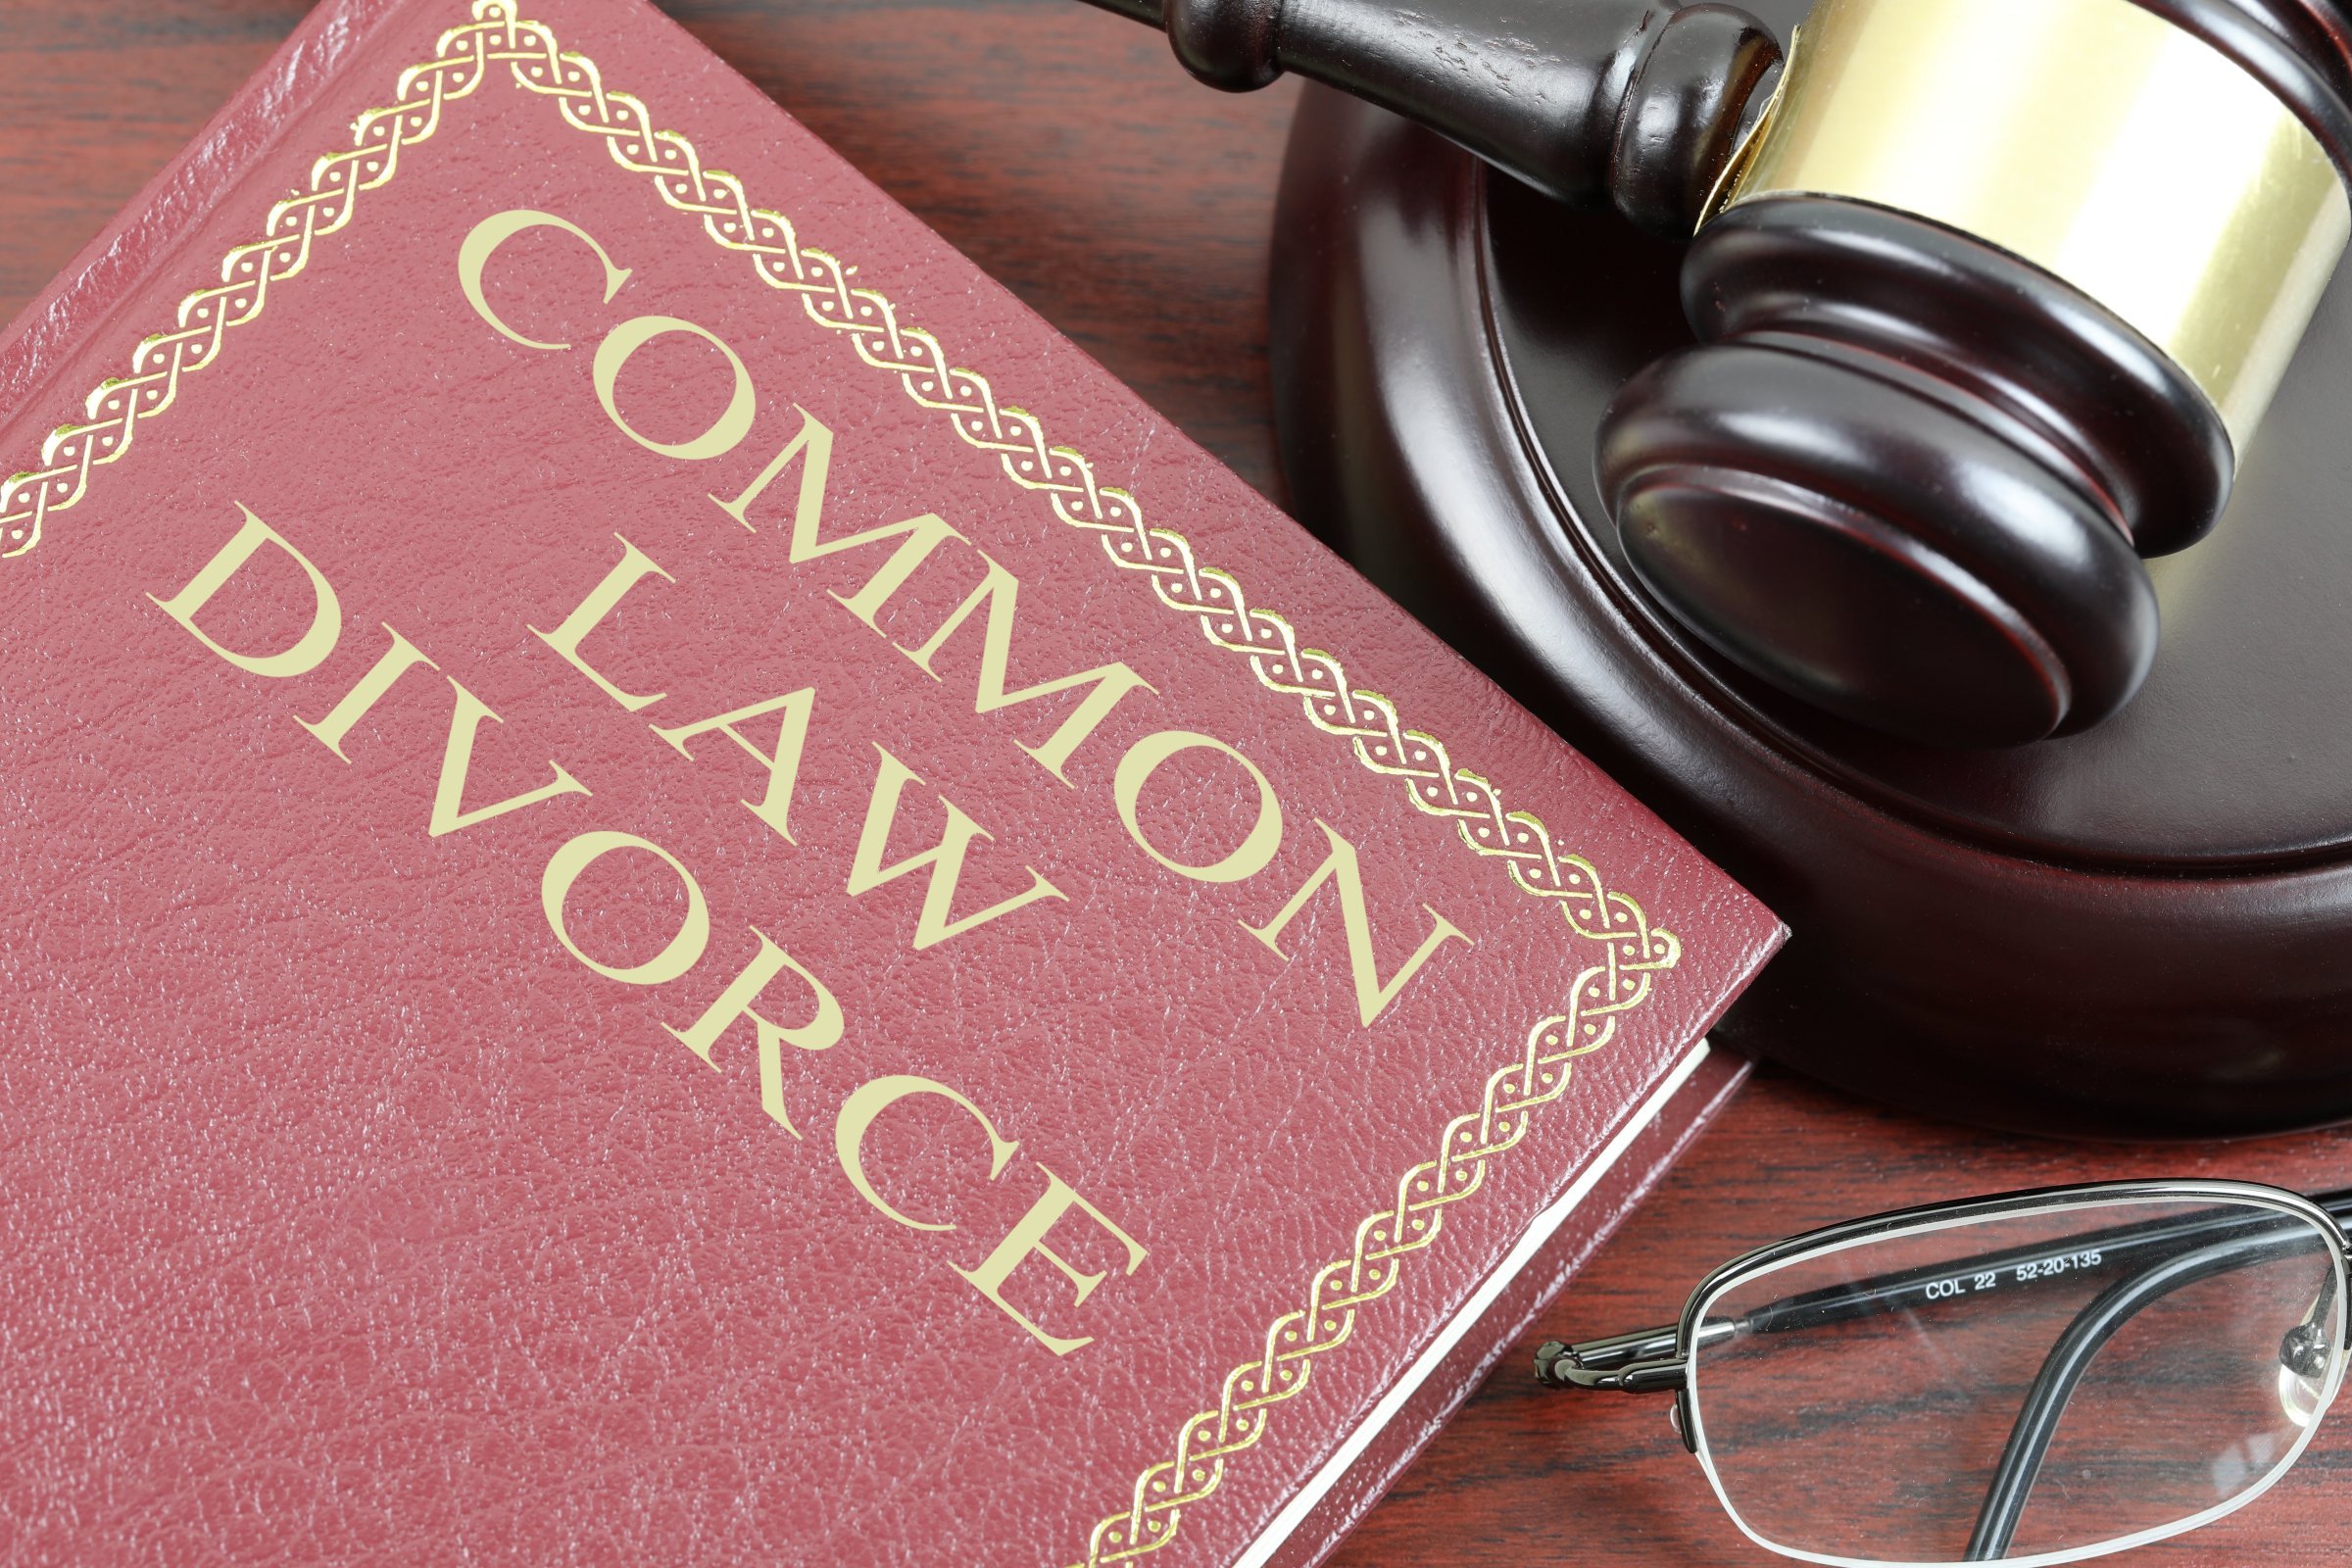 Common Law Divorce Free Of Charge Creative Commons Law Book Image